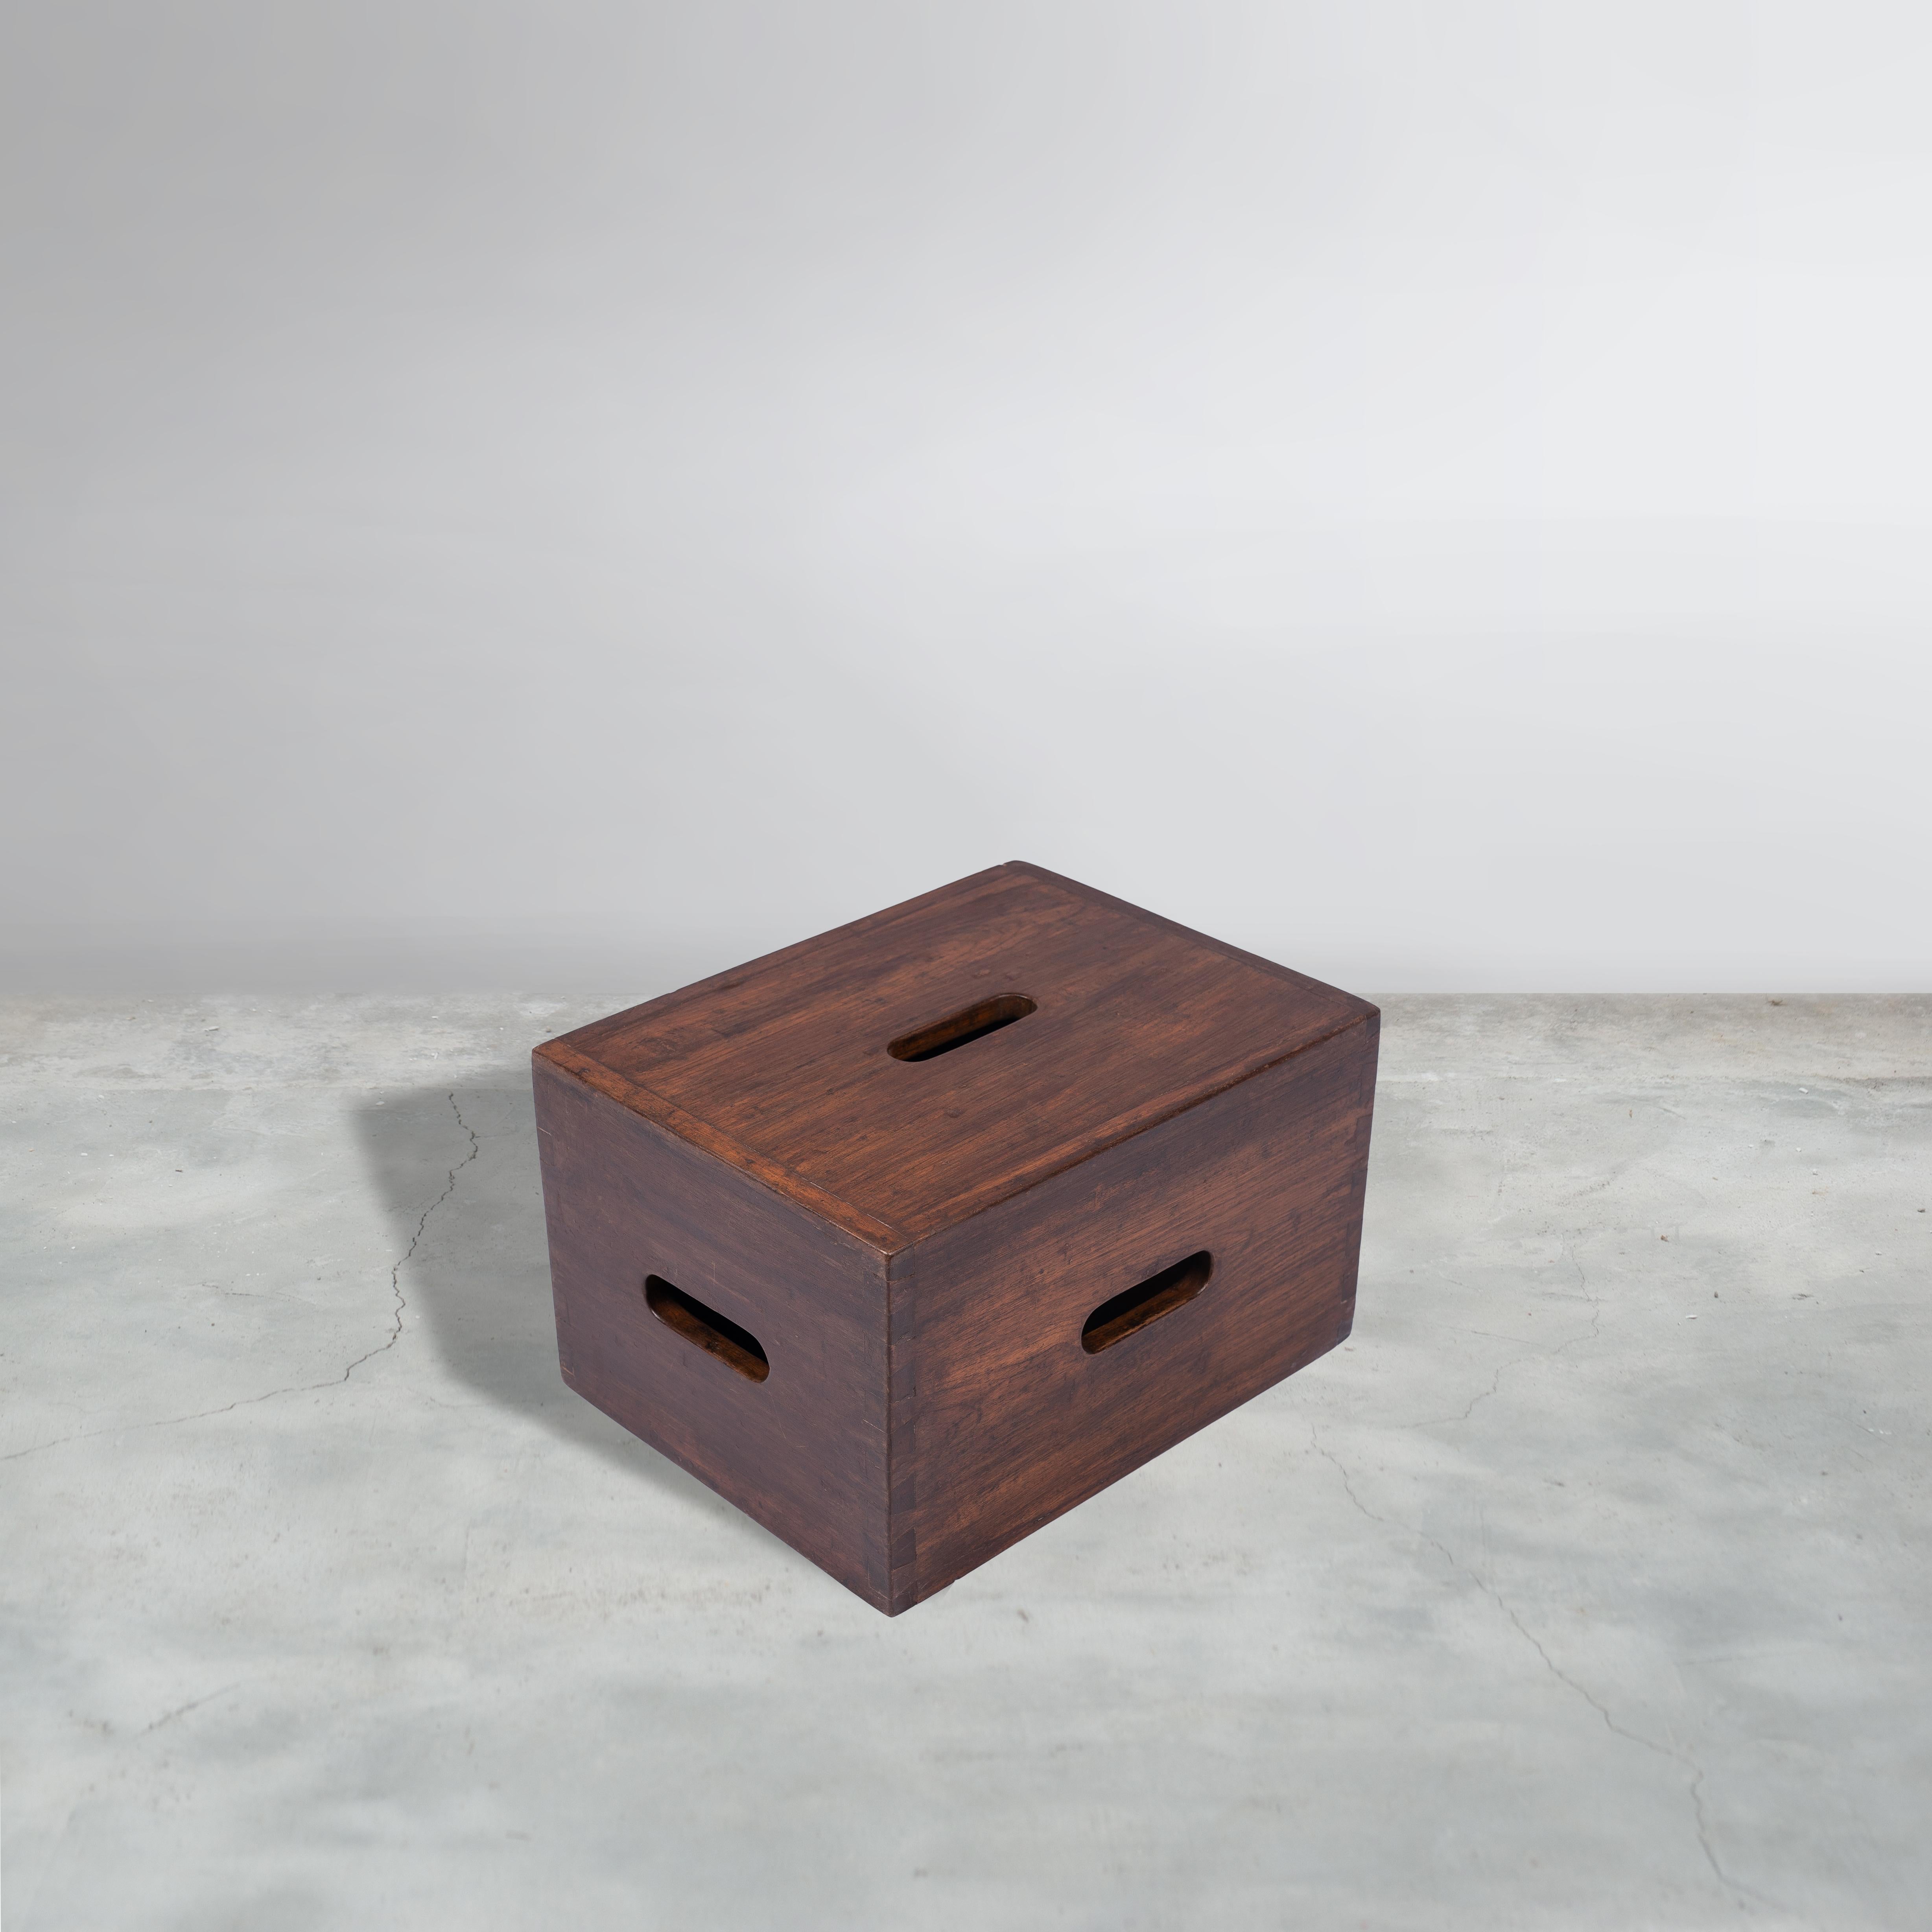 This stool is not only a fantastic piece, it’s a rare collectors item. It is raw in its simplicity, embodying an expressing a nonchalance. It is a beautiful piece that could be put in a bedroom, in a walk way or as additional object in a living